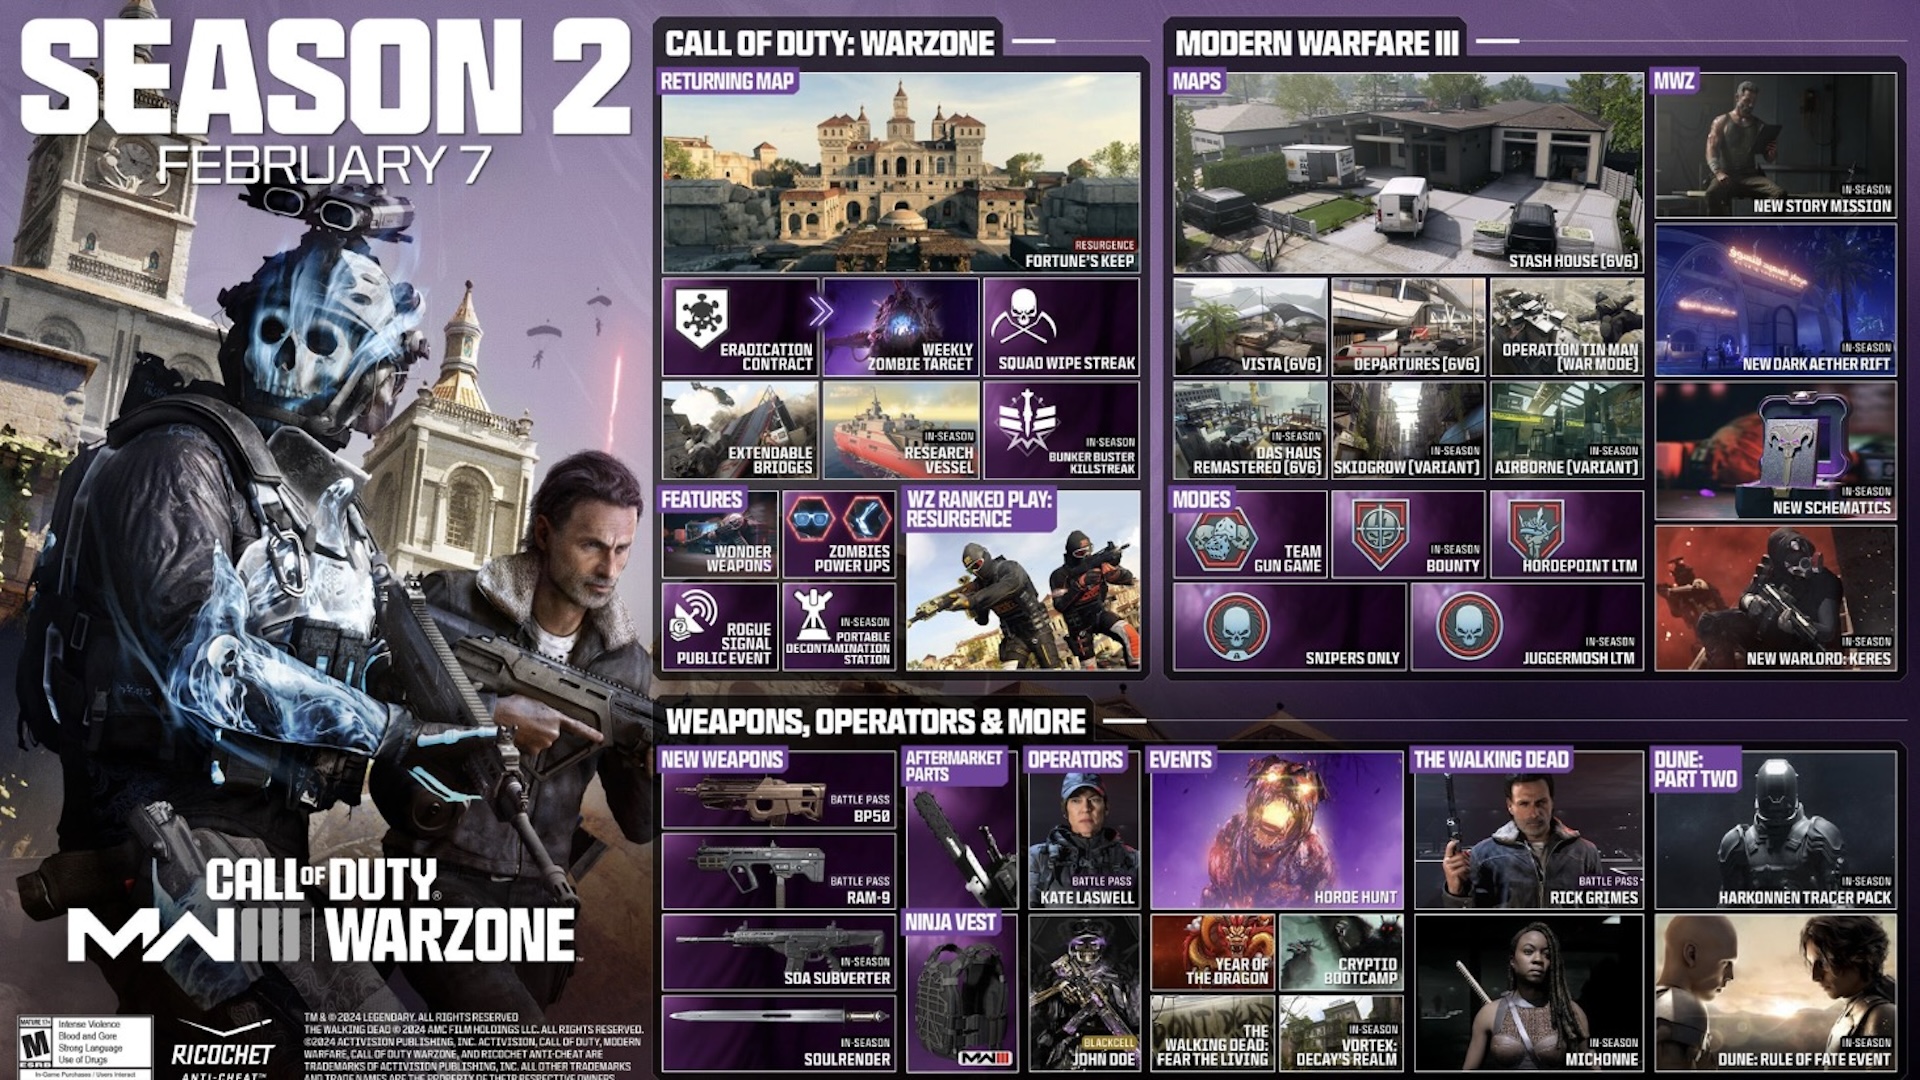 An infographic detailing everything being added to Modern Warfare 3 as part of Season 2